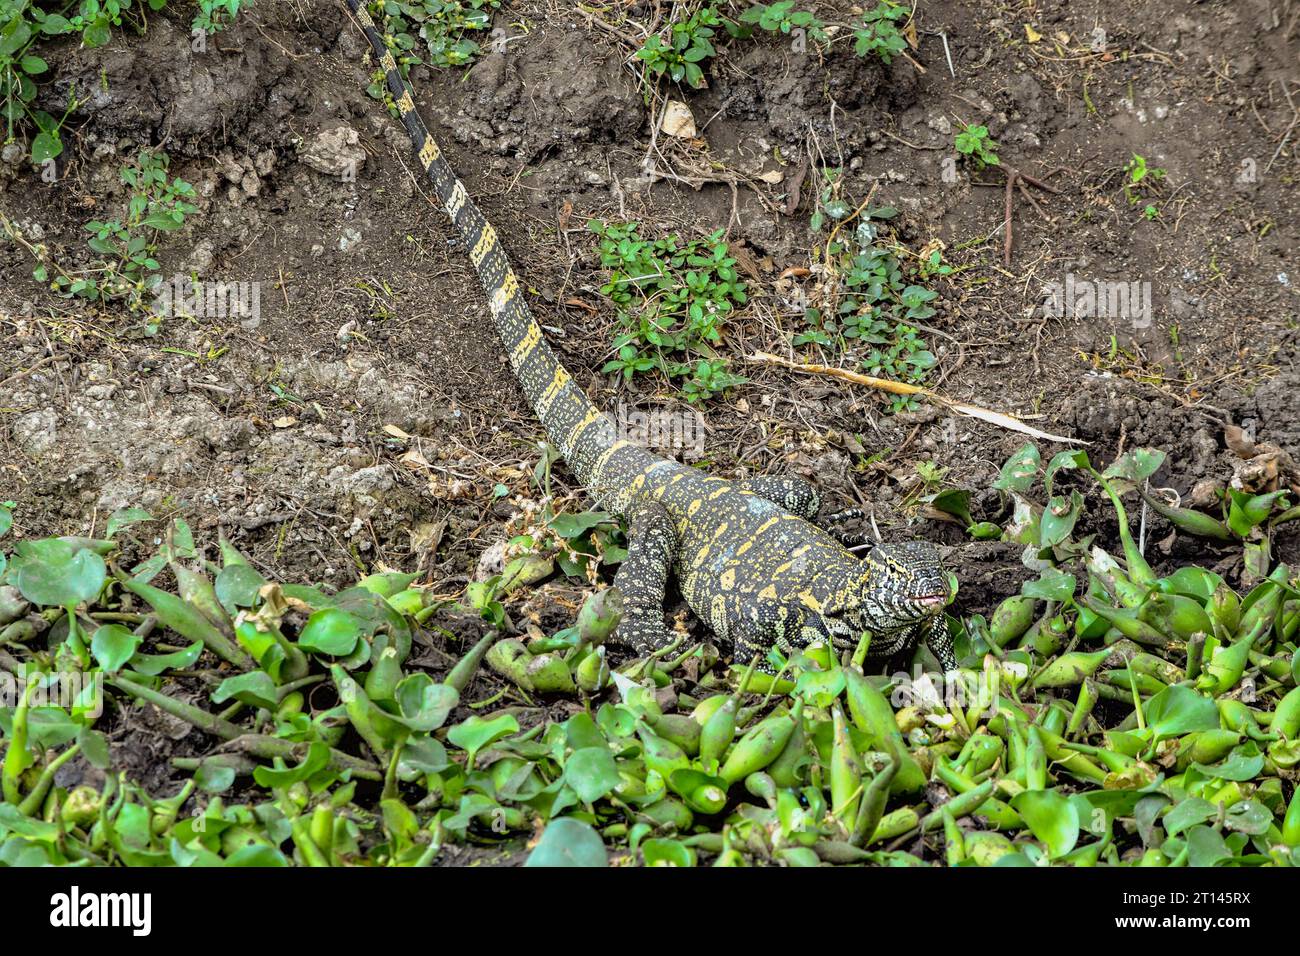 Nile monitor seen at the Queen Elizabeth National Park in Uganda, Africa Stock Photo